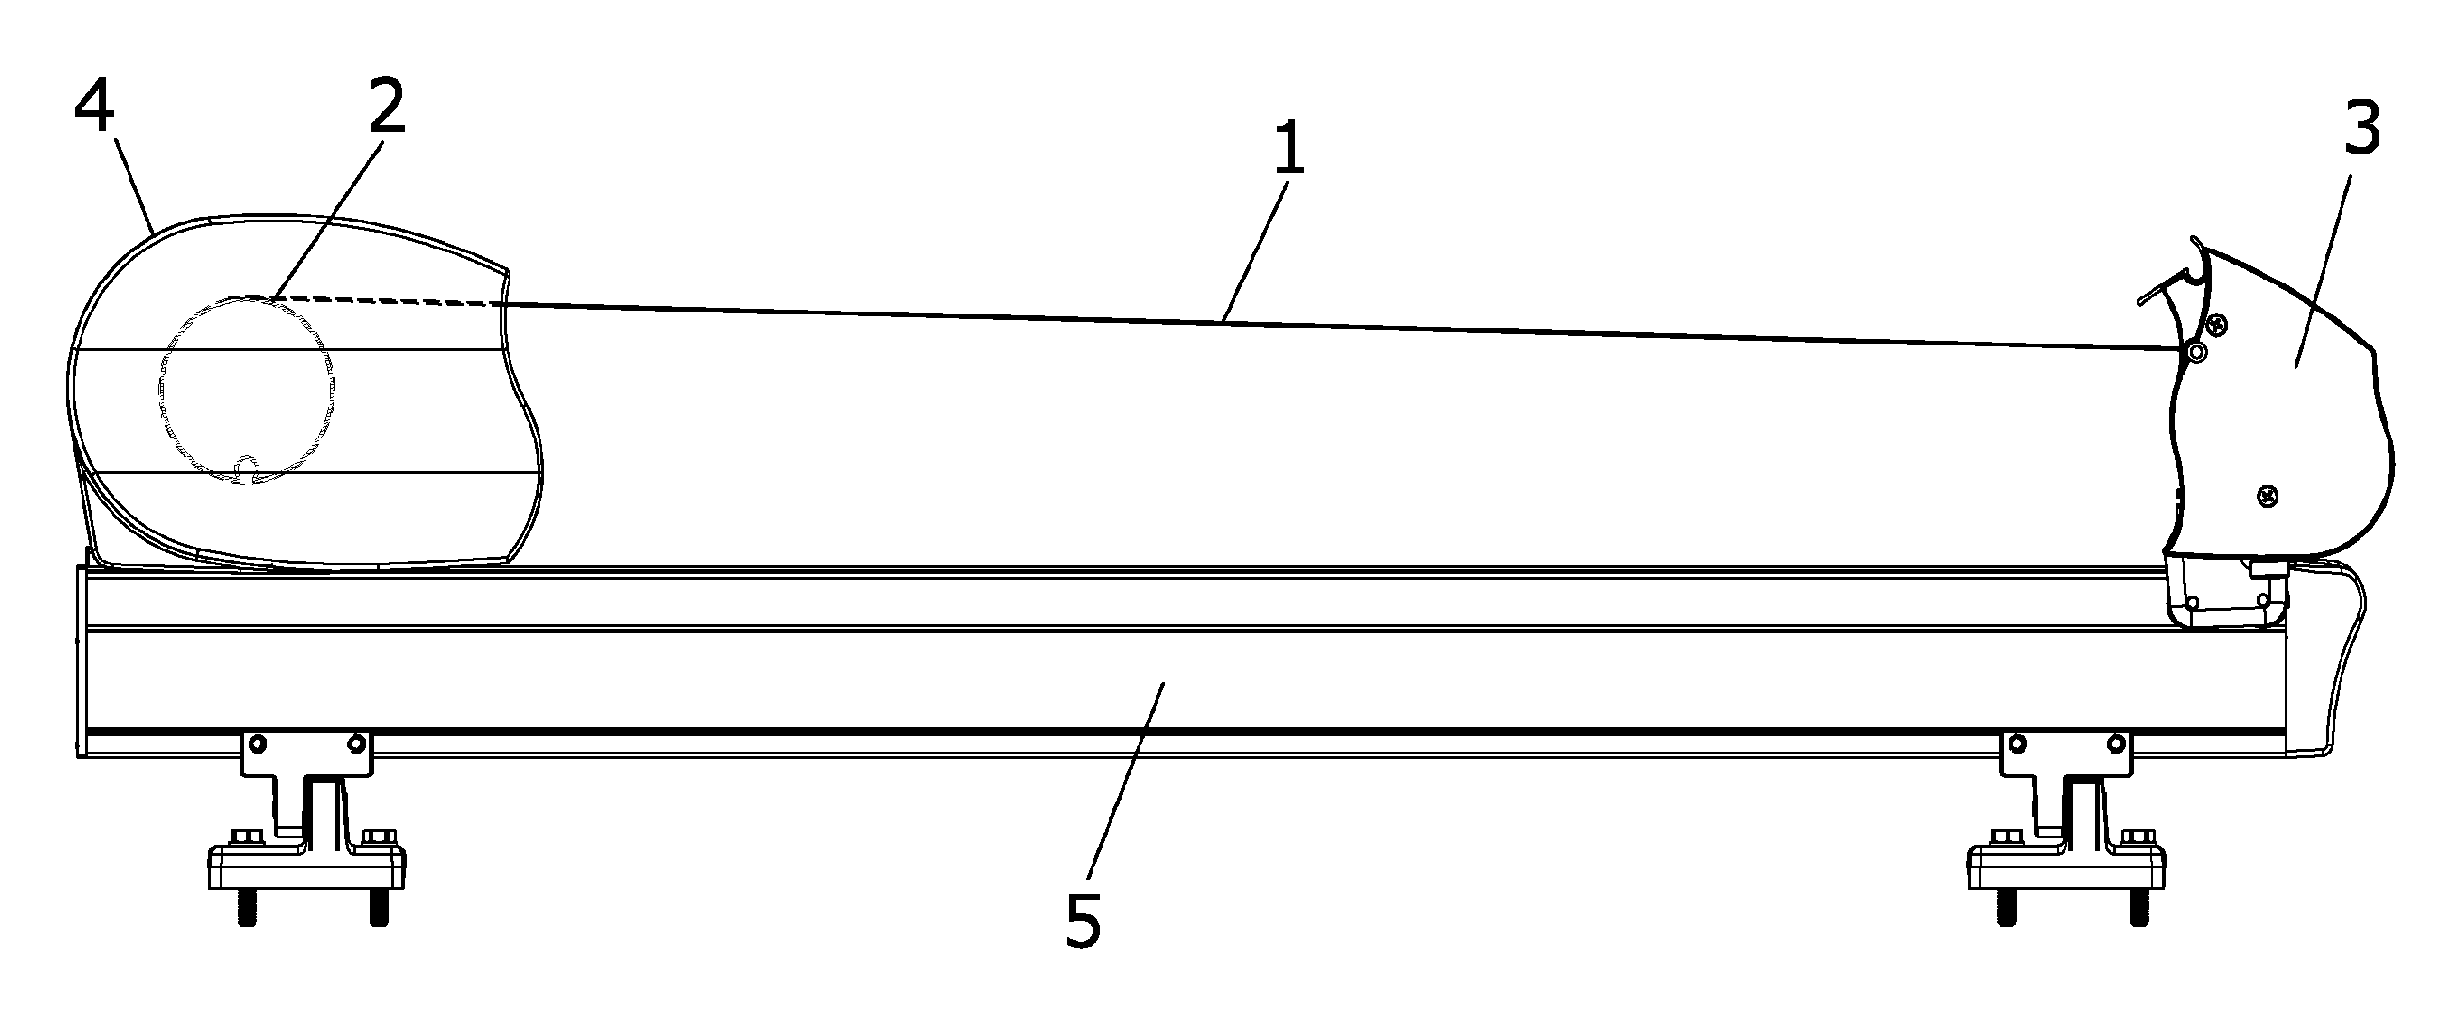 Shading device and method for installing the casing of said shading device